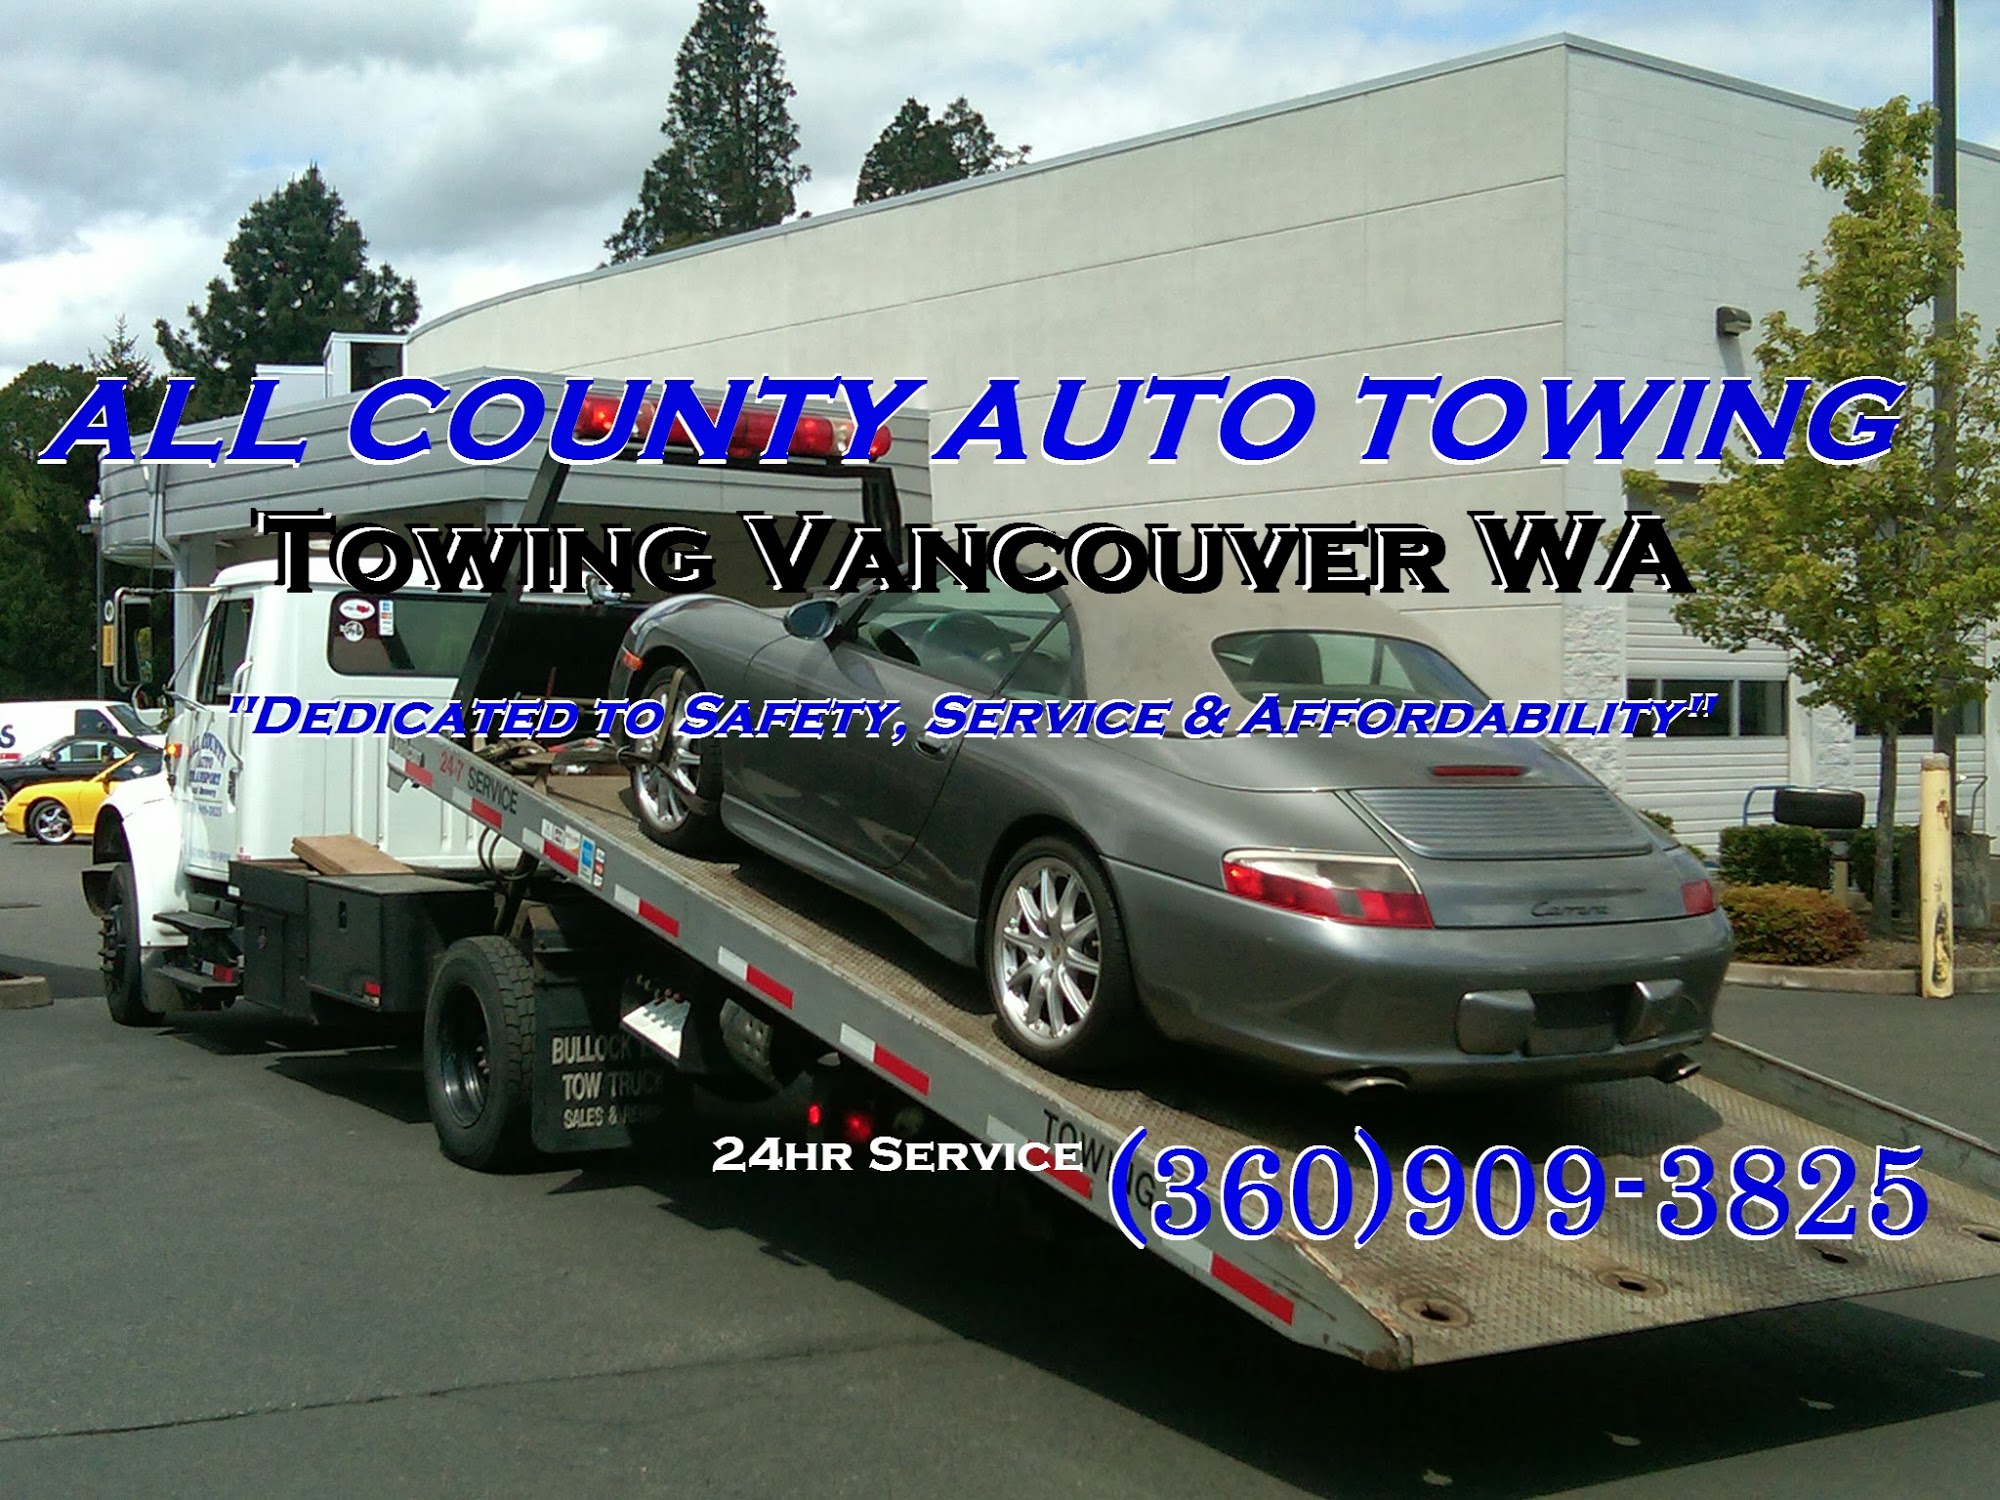 All County Auto Towing